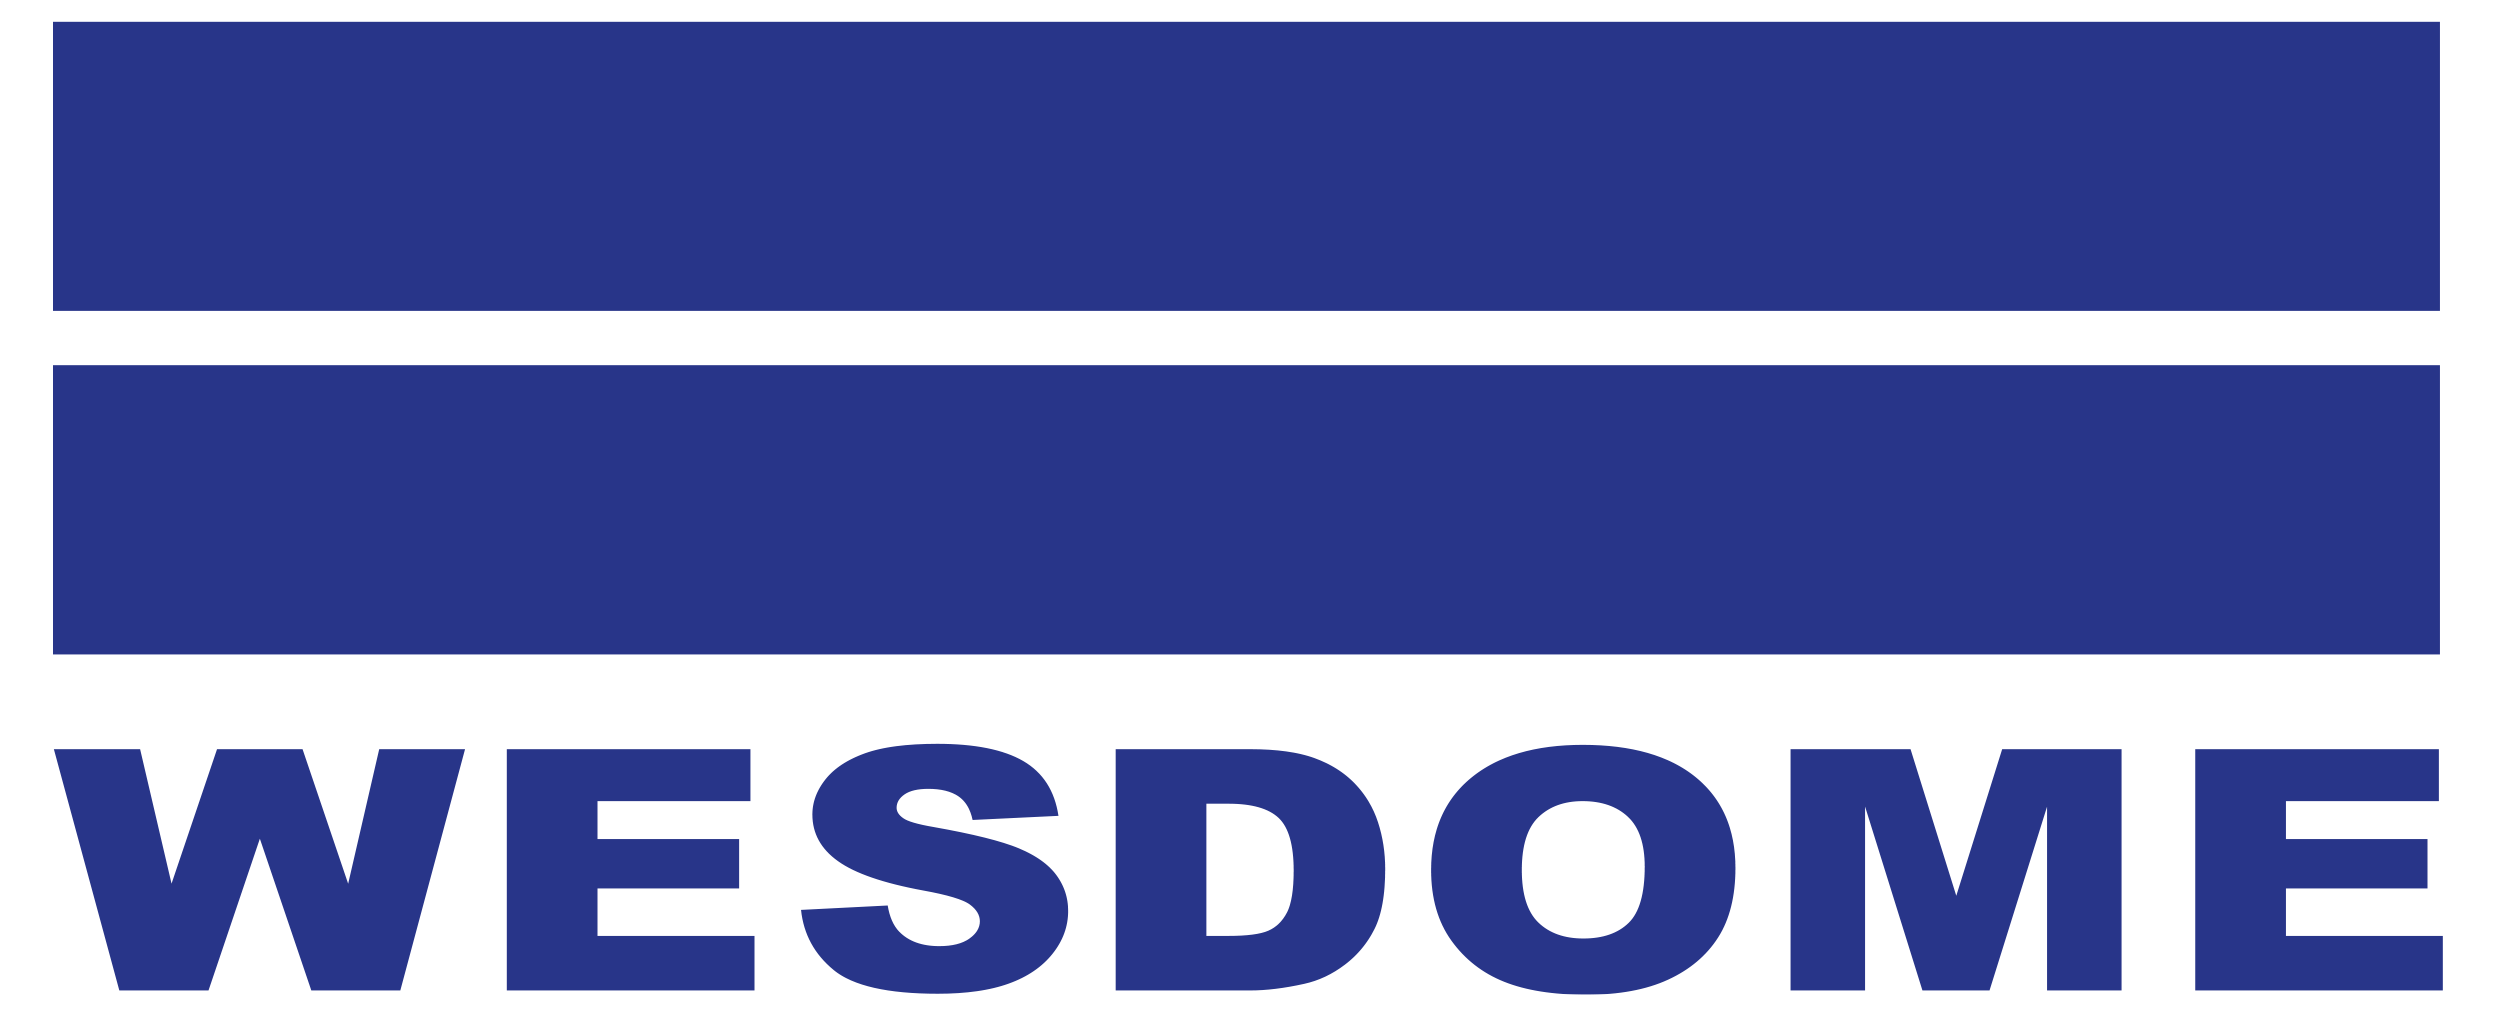 Wesdome-Logo-Blue.png